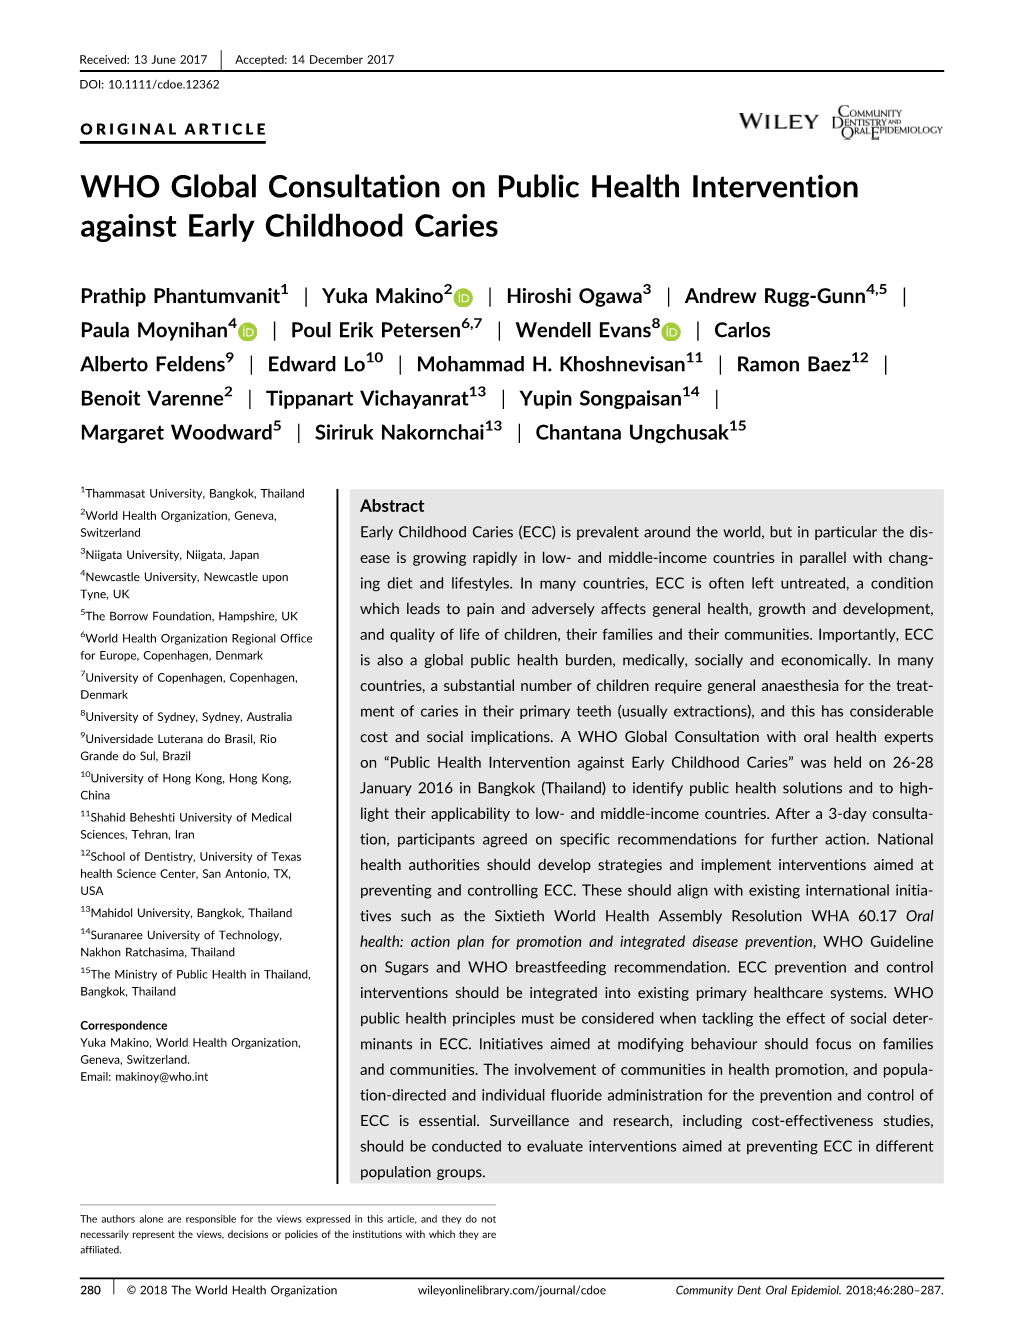 WHO Global Consultation on Public Health Intervention Against Early Childhood Caries